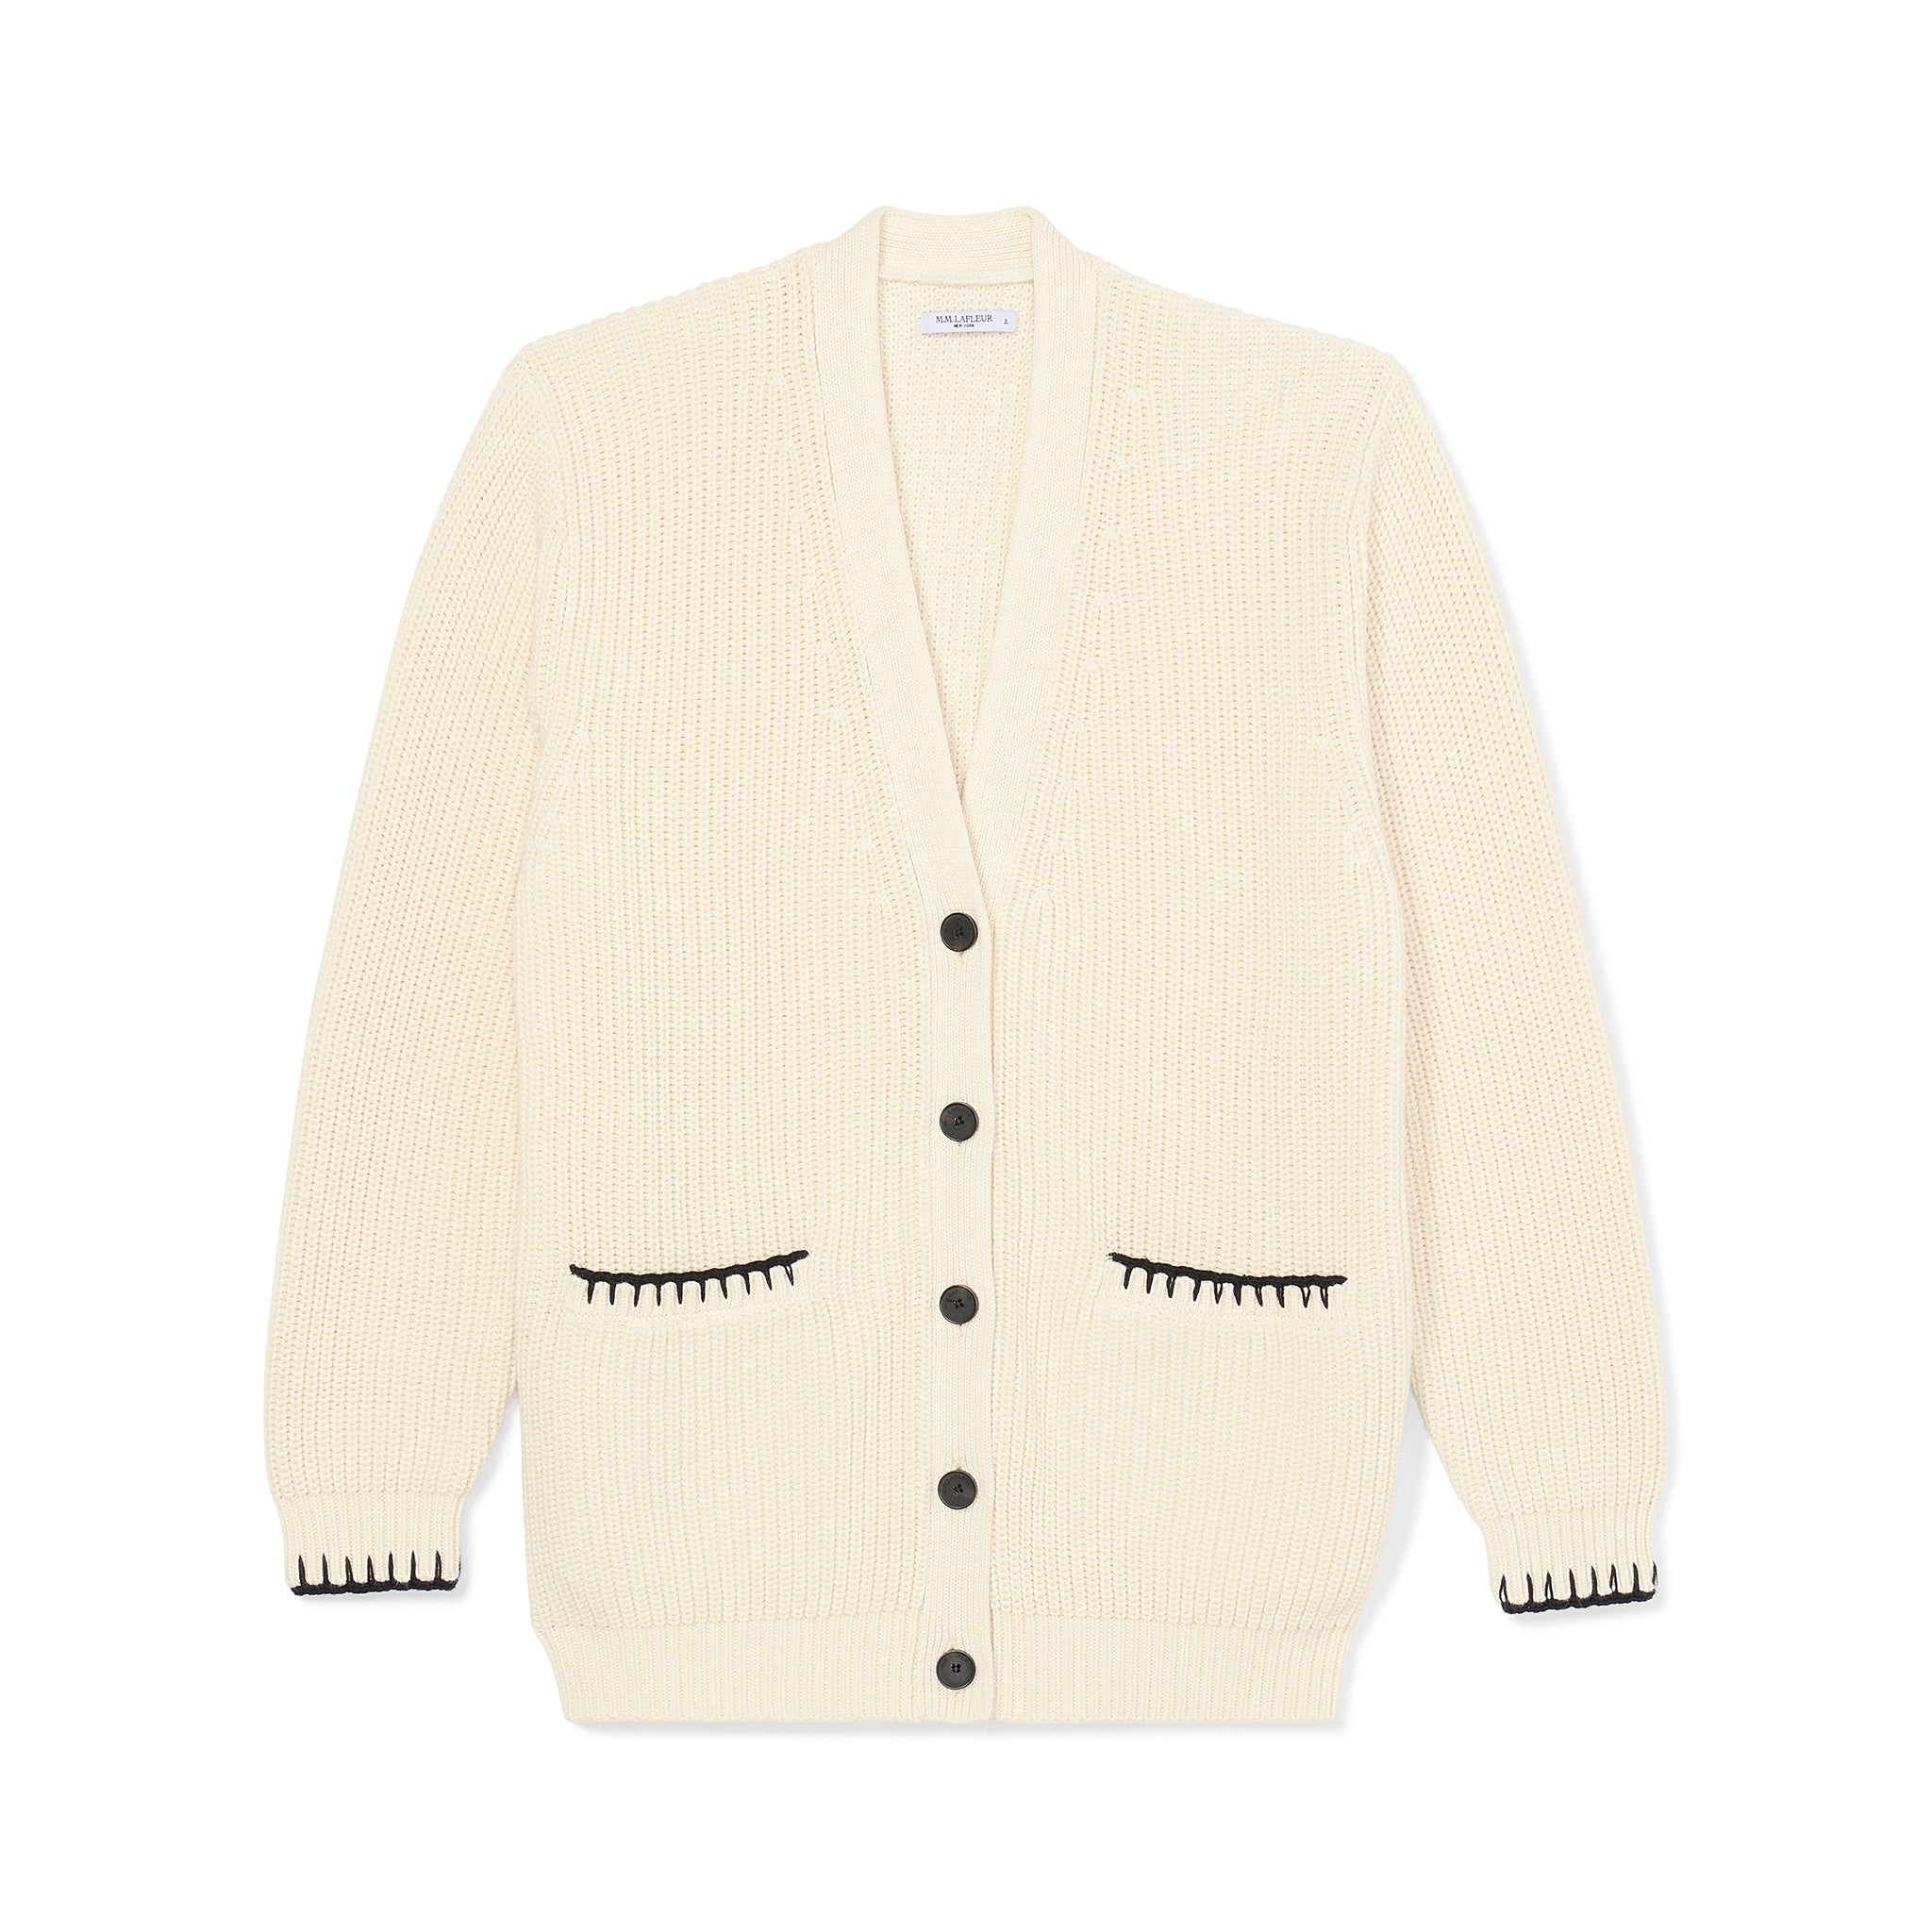 packshot image of the cookie cardigan in contrast knit 